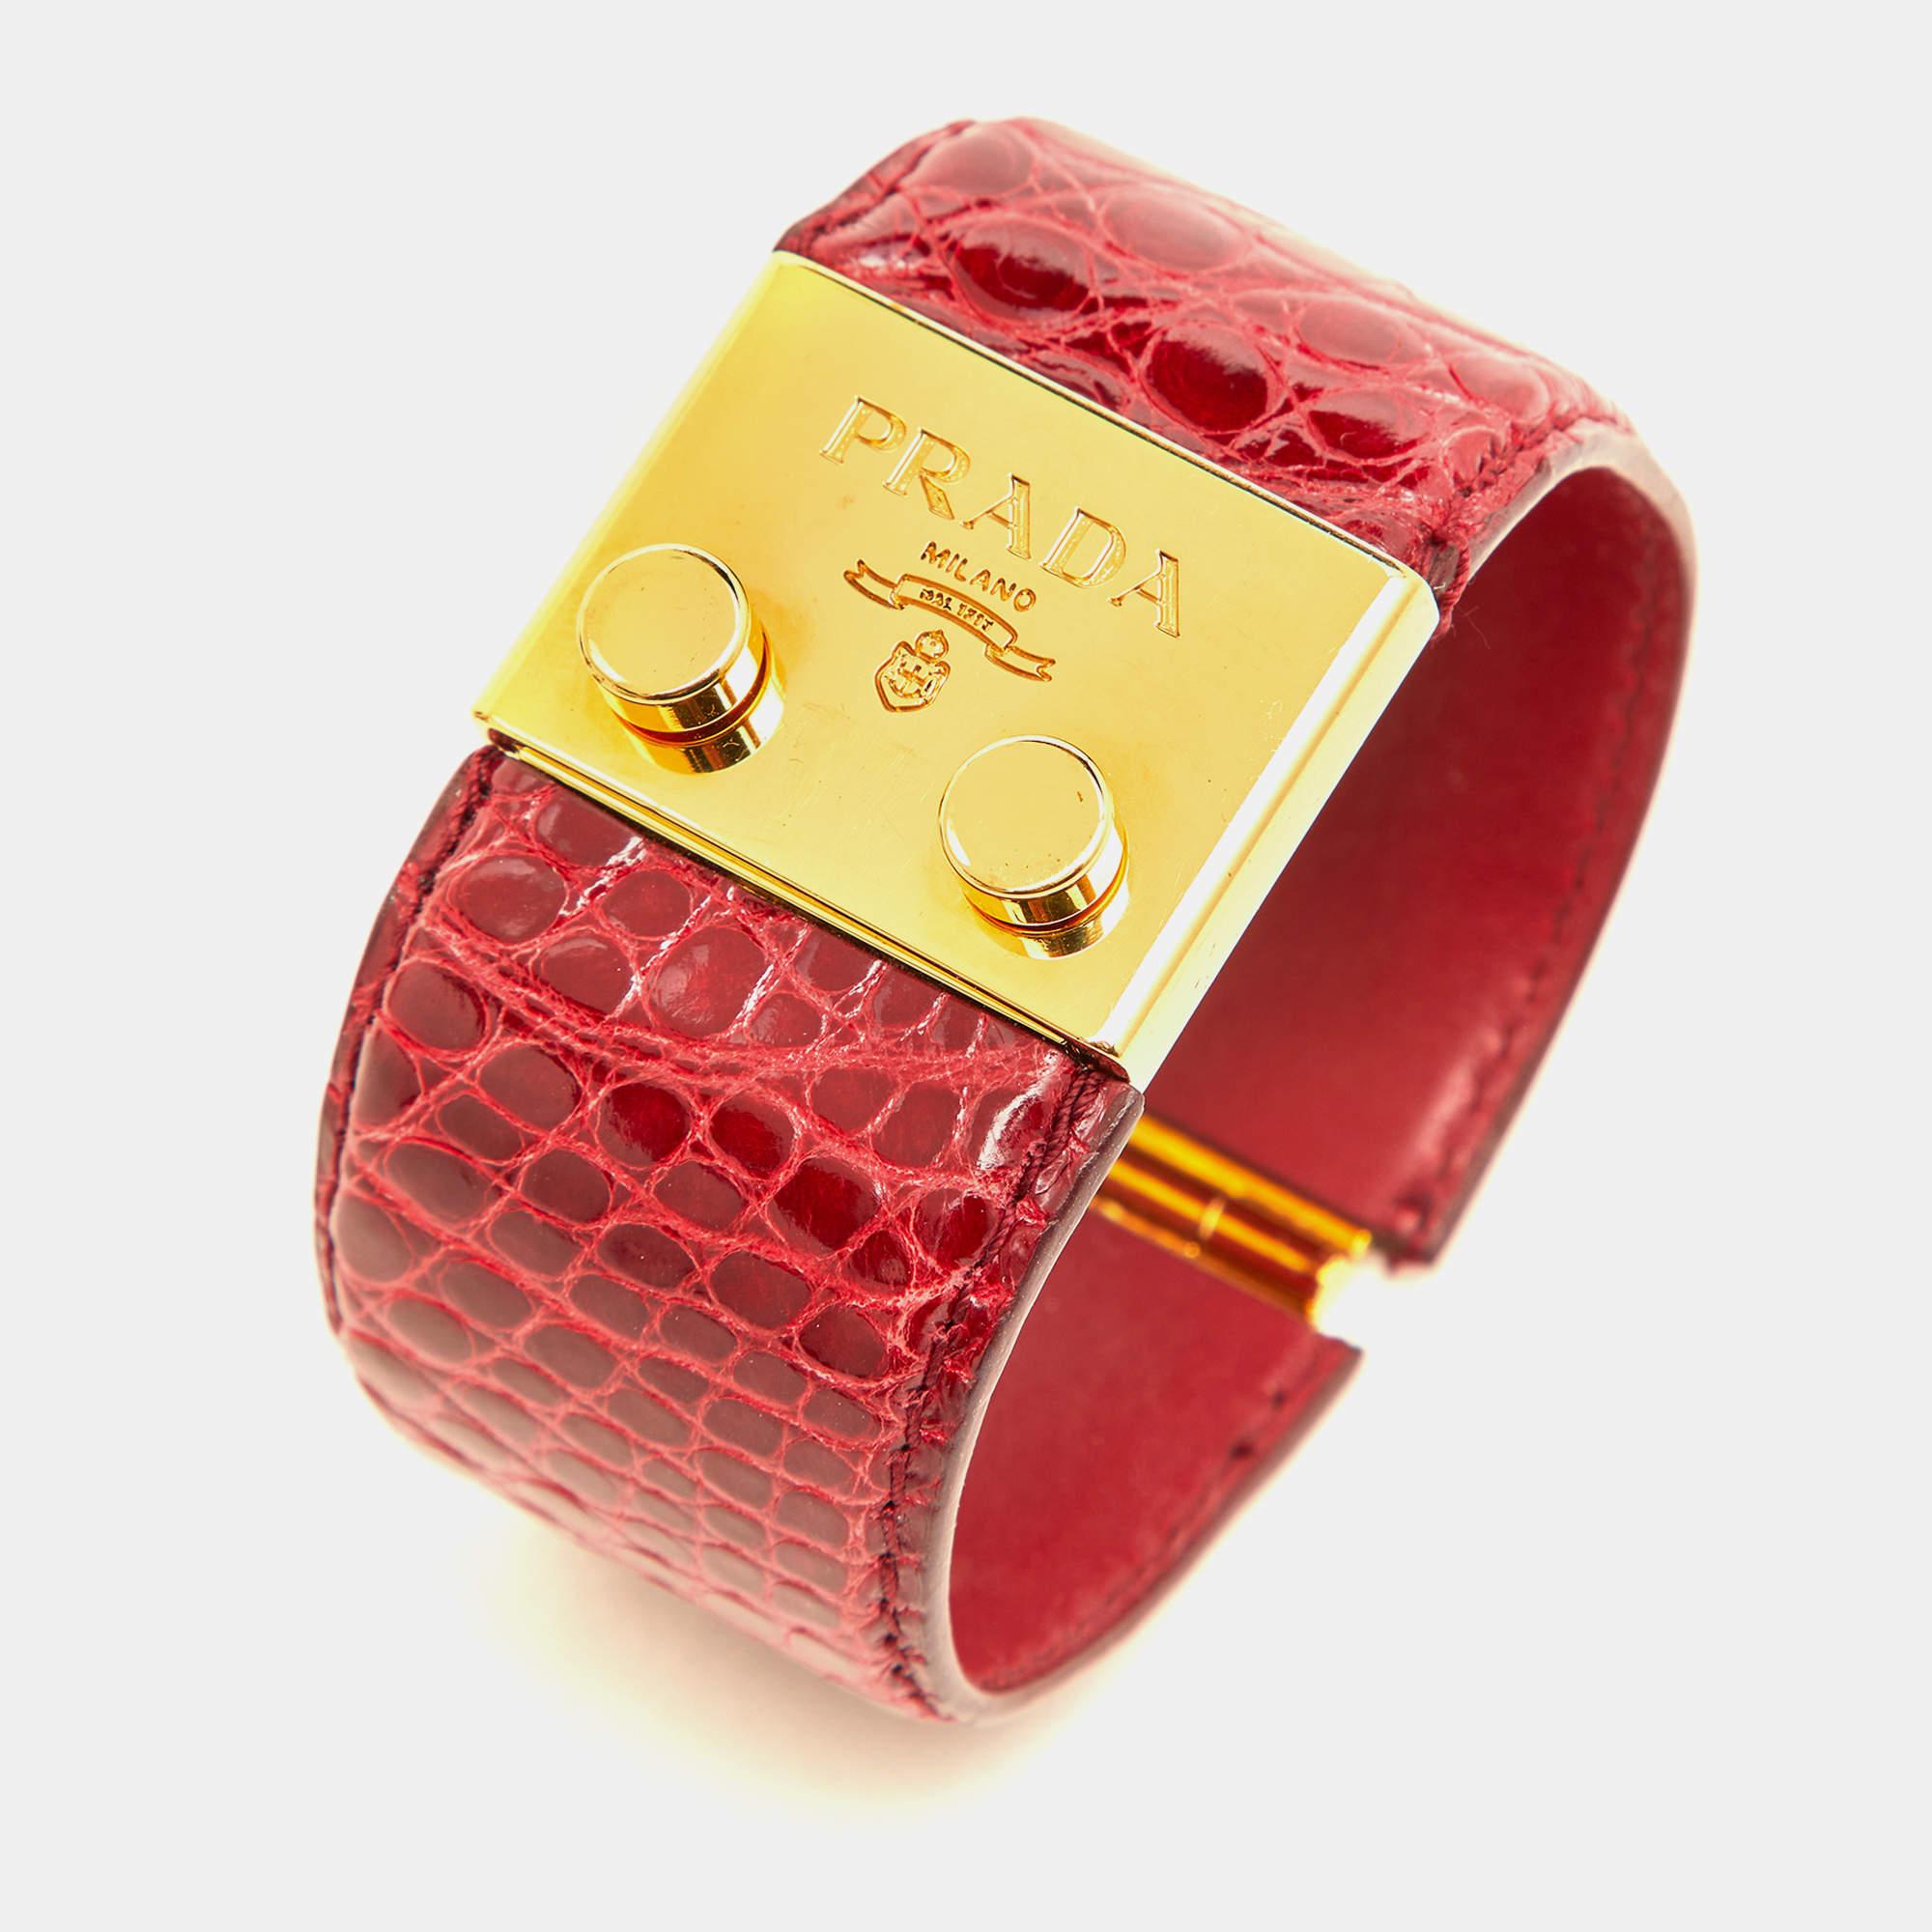 This beautiful Prada wide cuff bracelet is sure to stand out when it sits on your wrist. Crafted with precision using alligator leather and gold-tone metal, the fine bracelet will be an investment you'll love.

